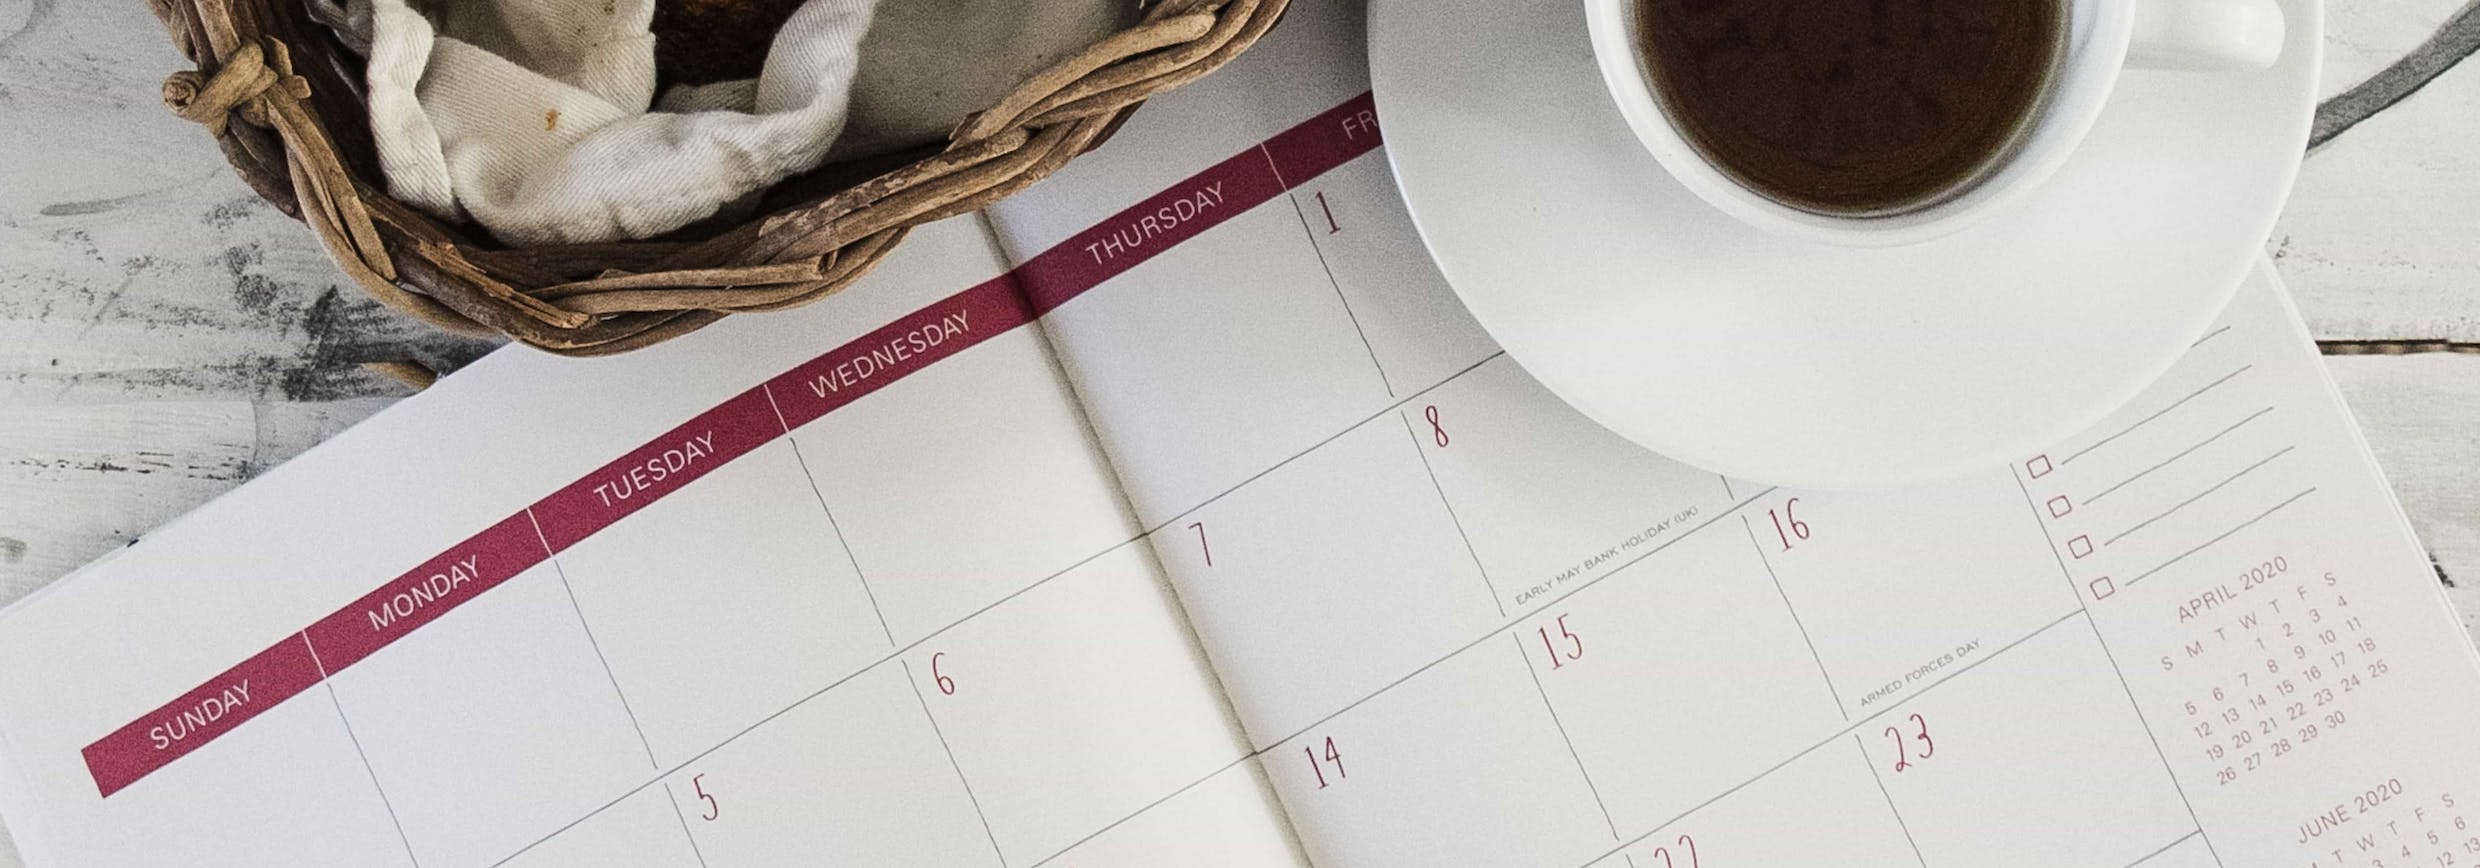 cup of coffee and open calendar representing maximising productivity